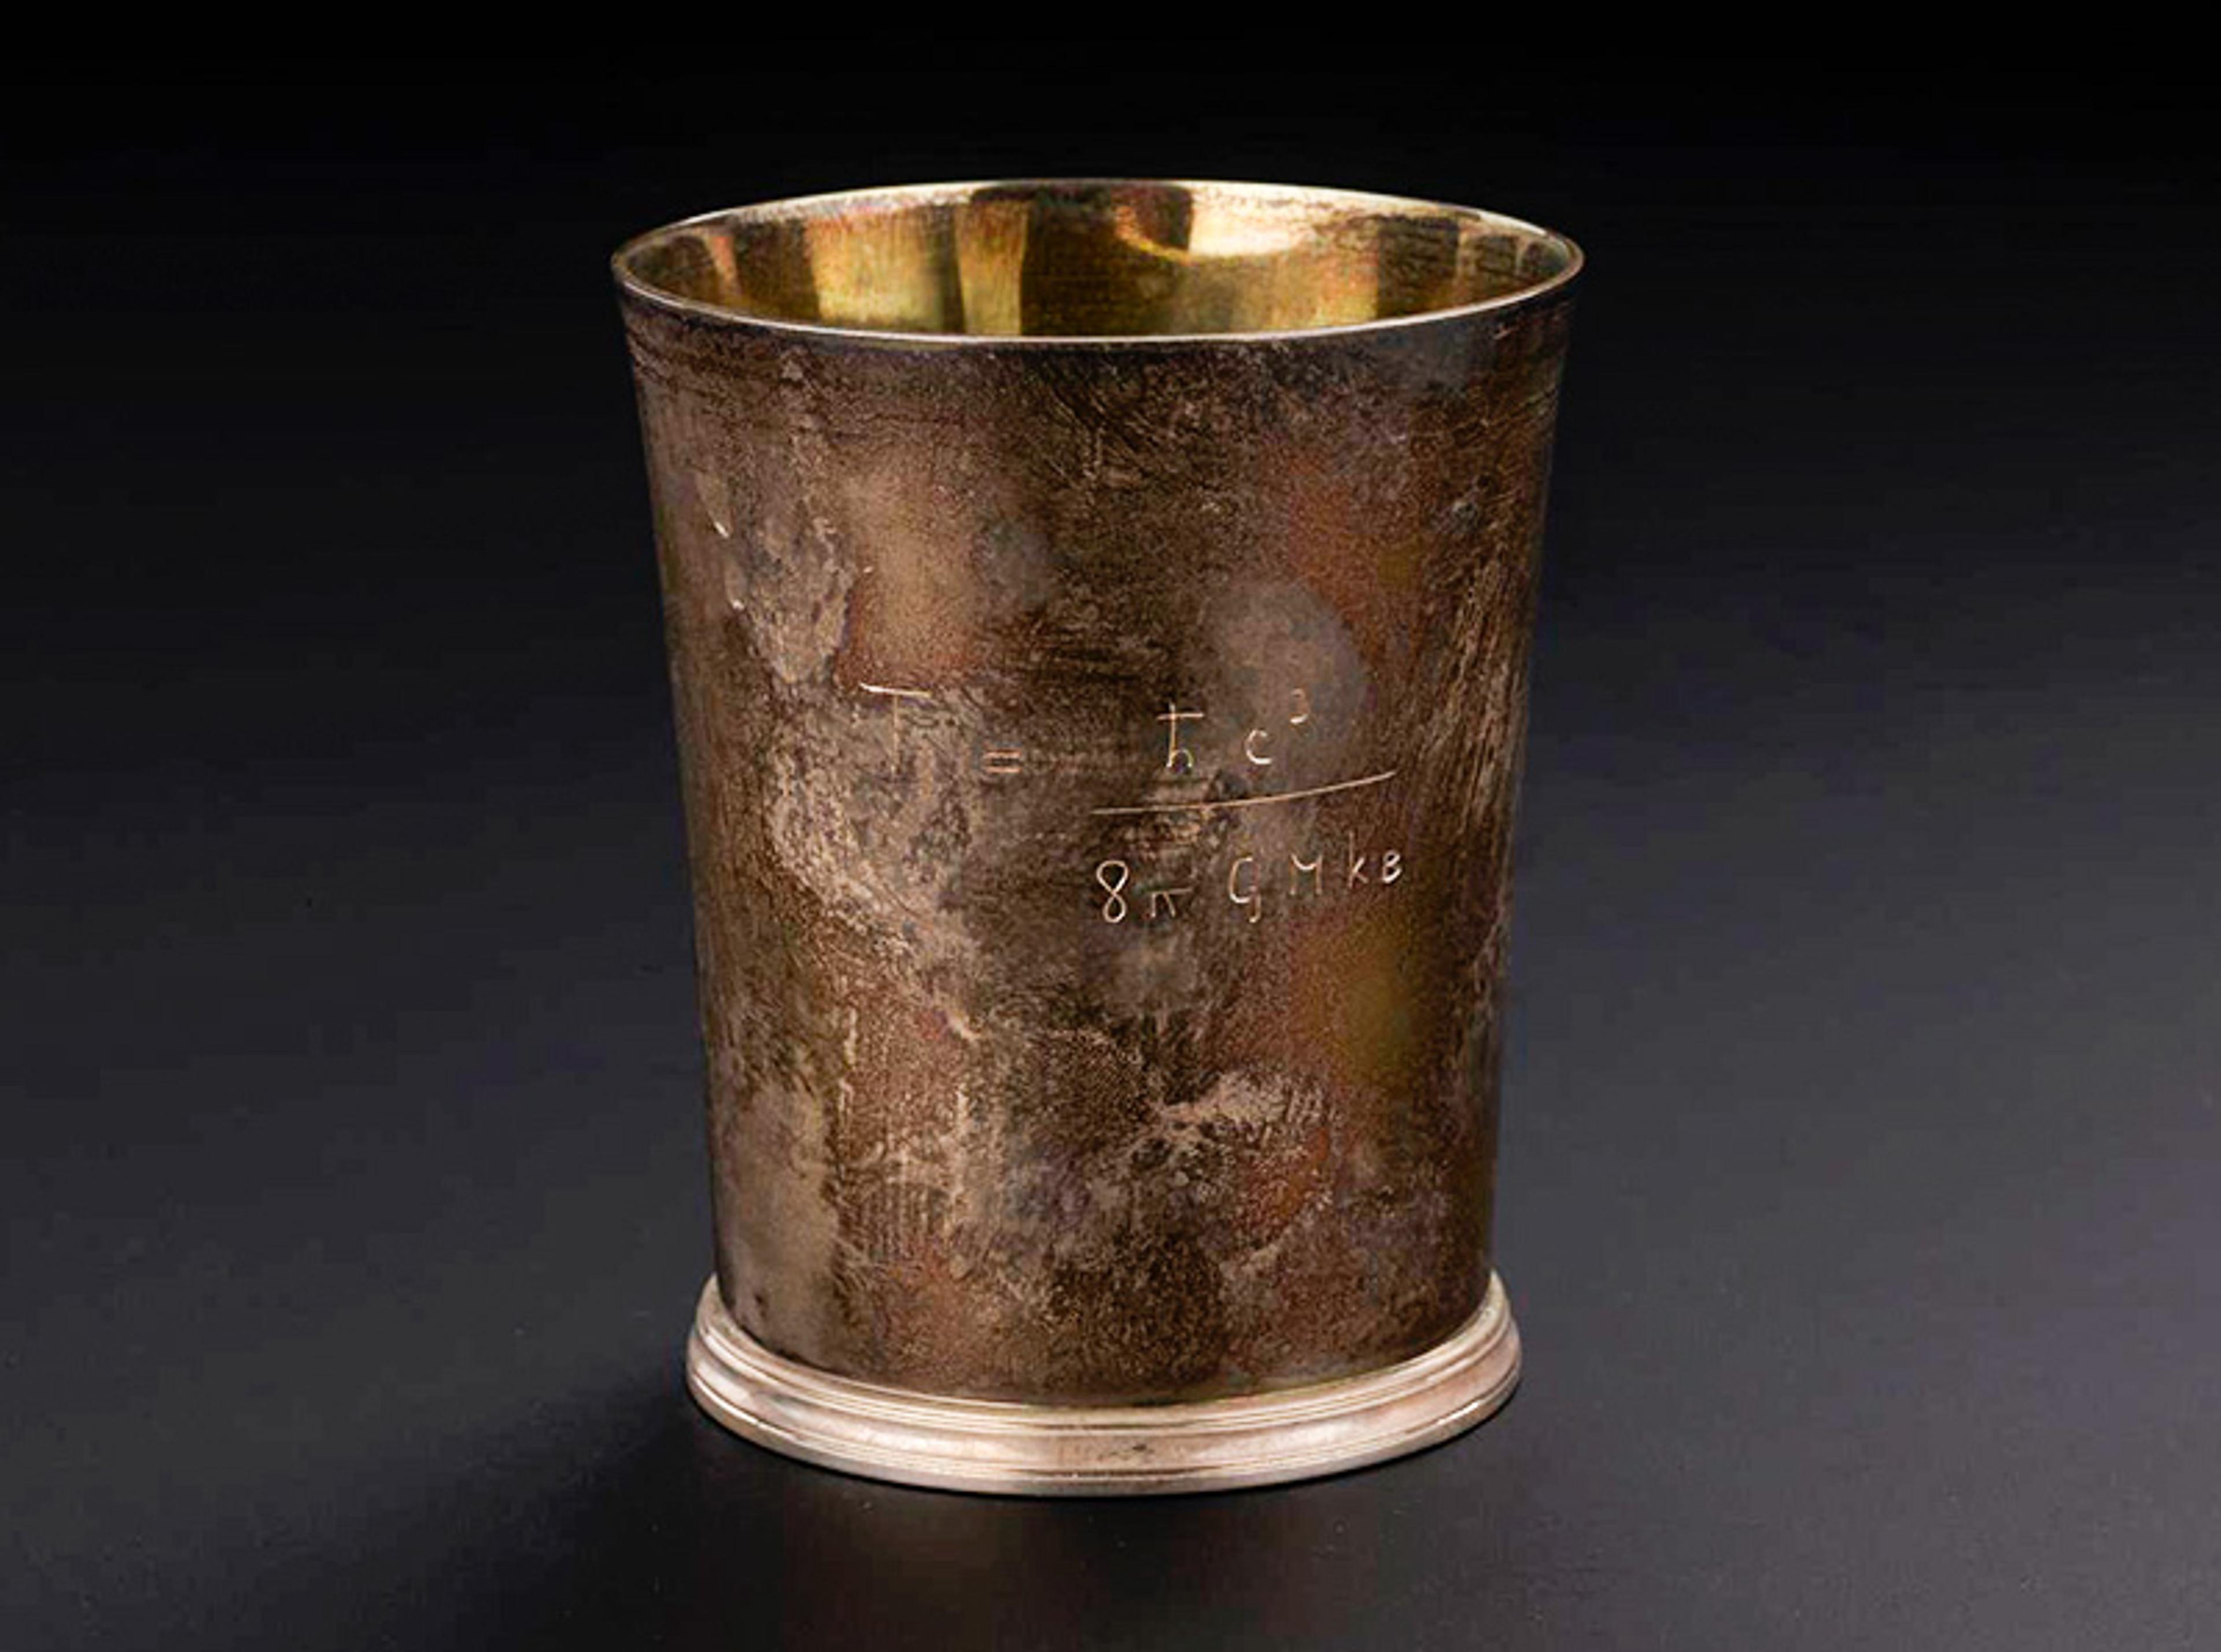 A metallic cylindrical cup with a tarnished, rustic appearance. The cup has a mathematical equation etched into its side. The background is black, highlighting the cup’s worn texture and showing its reflective golden interior.